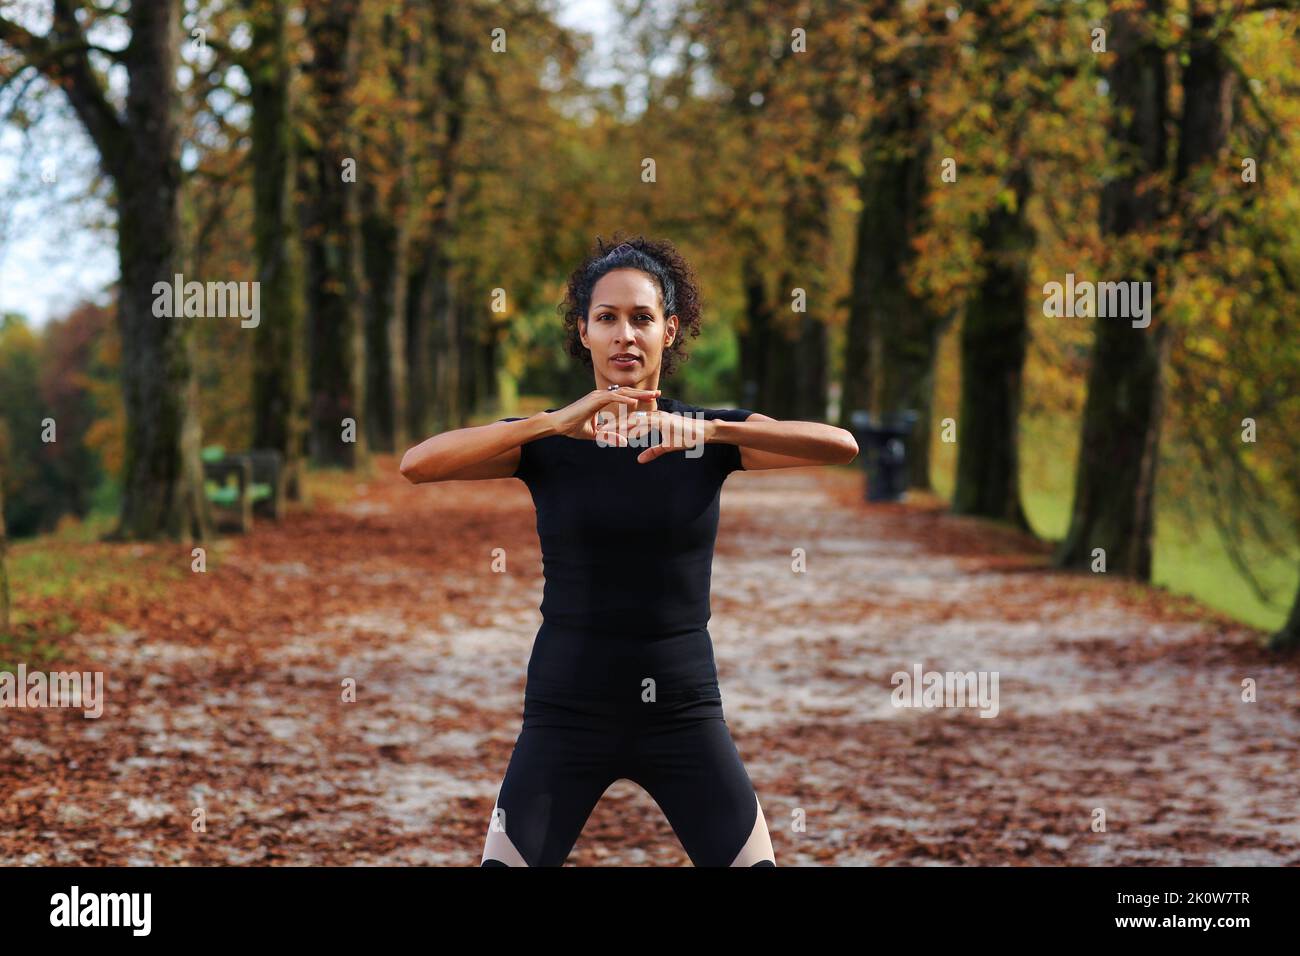 woman outdoors with arms on chest meditating in sportswear Stock Photo